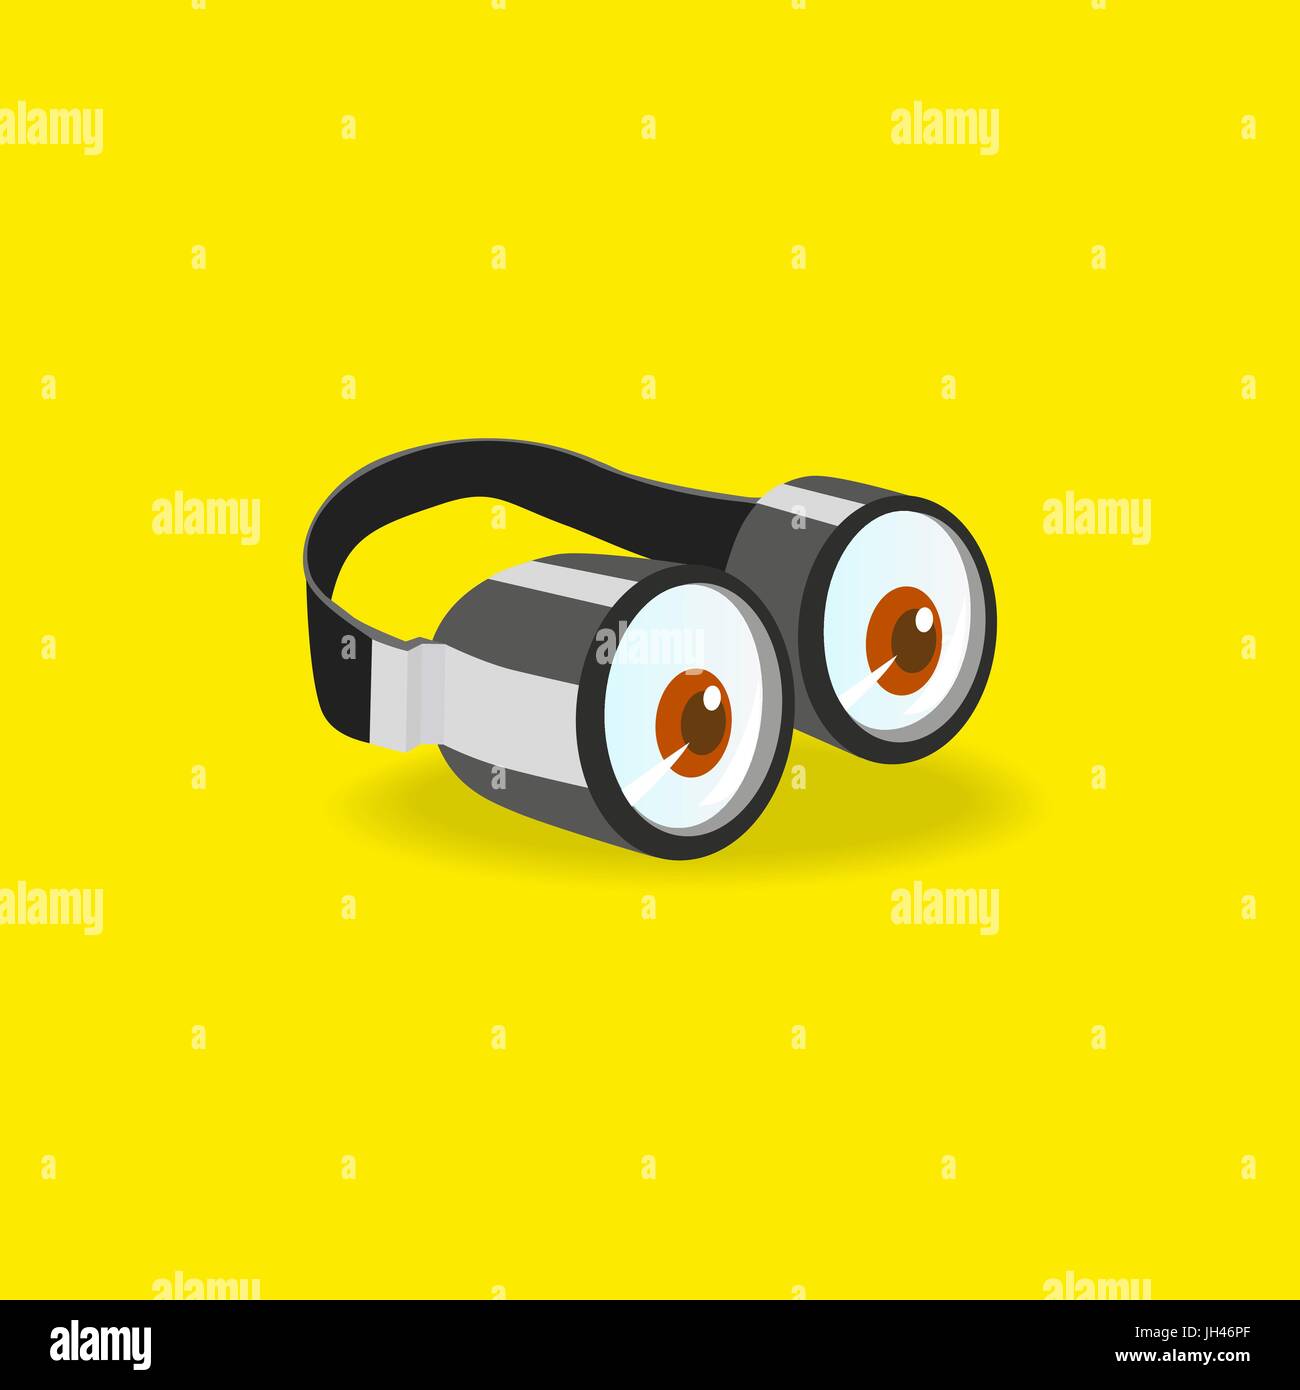 Minions Stock Vector Images - Alamy